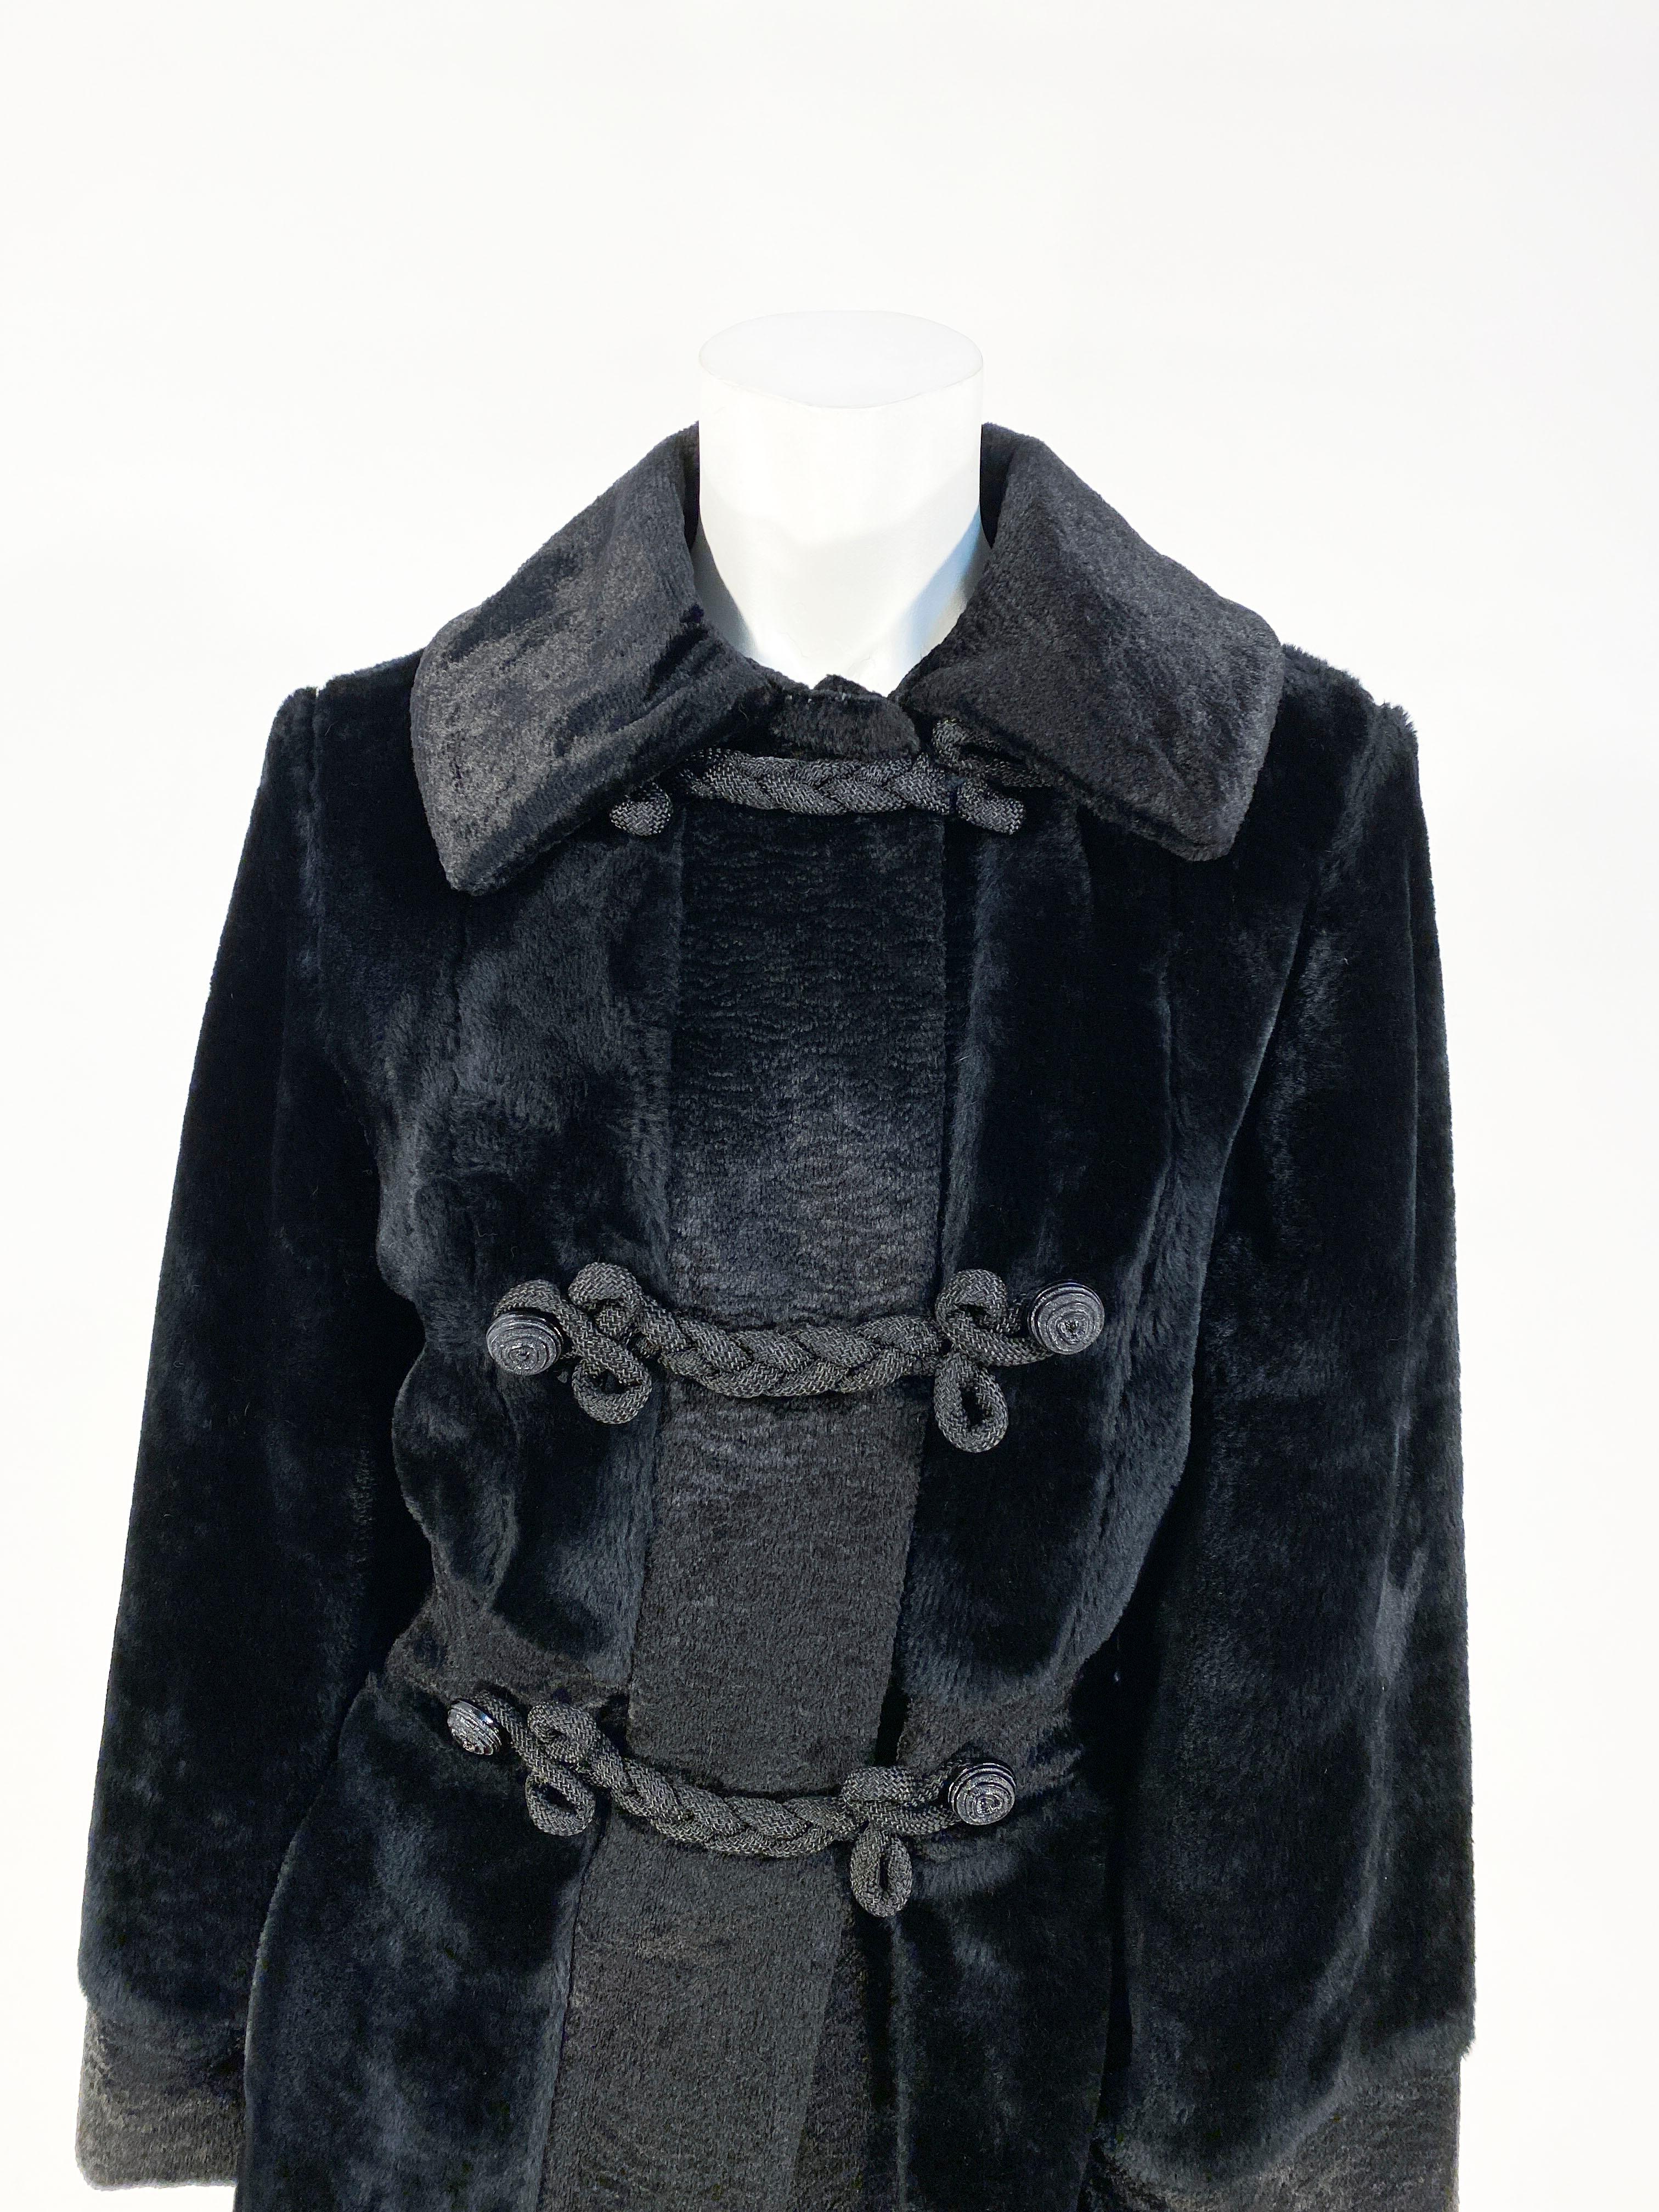 1960s Black faux fur/plush velvet mod coat with a Russian-influence. The coat is mid-length with hand made woven cordé elongated frog closures along the double-breasted face of the coat. The buttons are original and the coat has front pockets. 